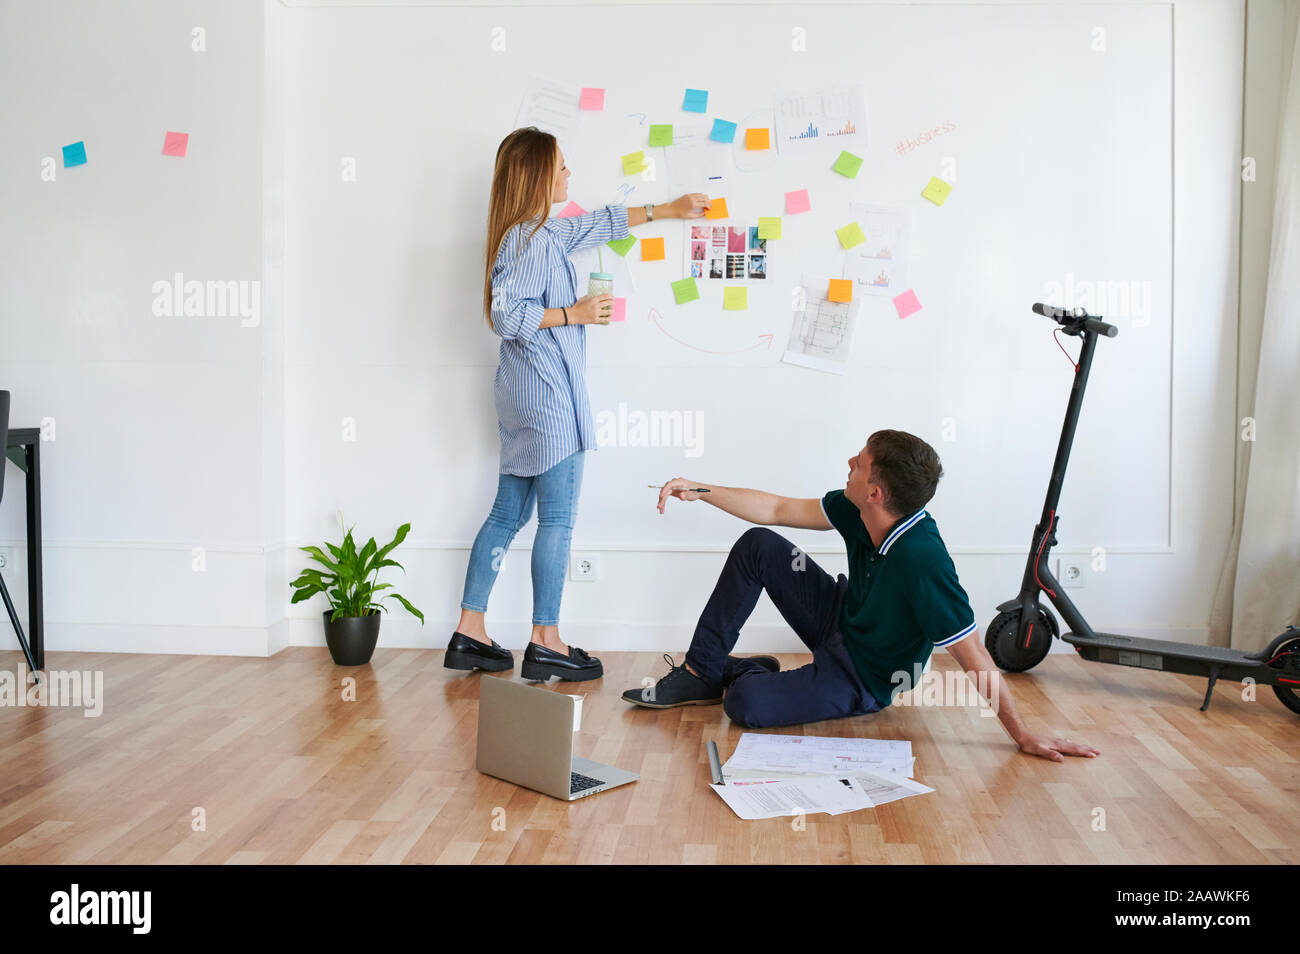 Young business people brainstorming in an office Stock Photo